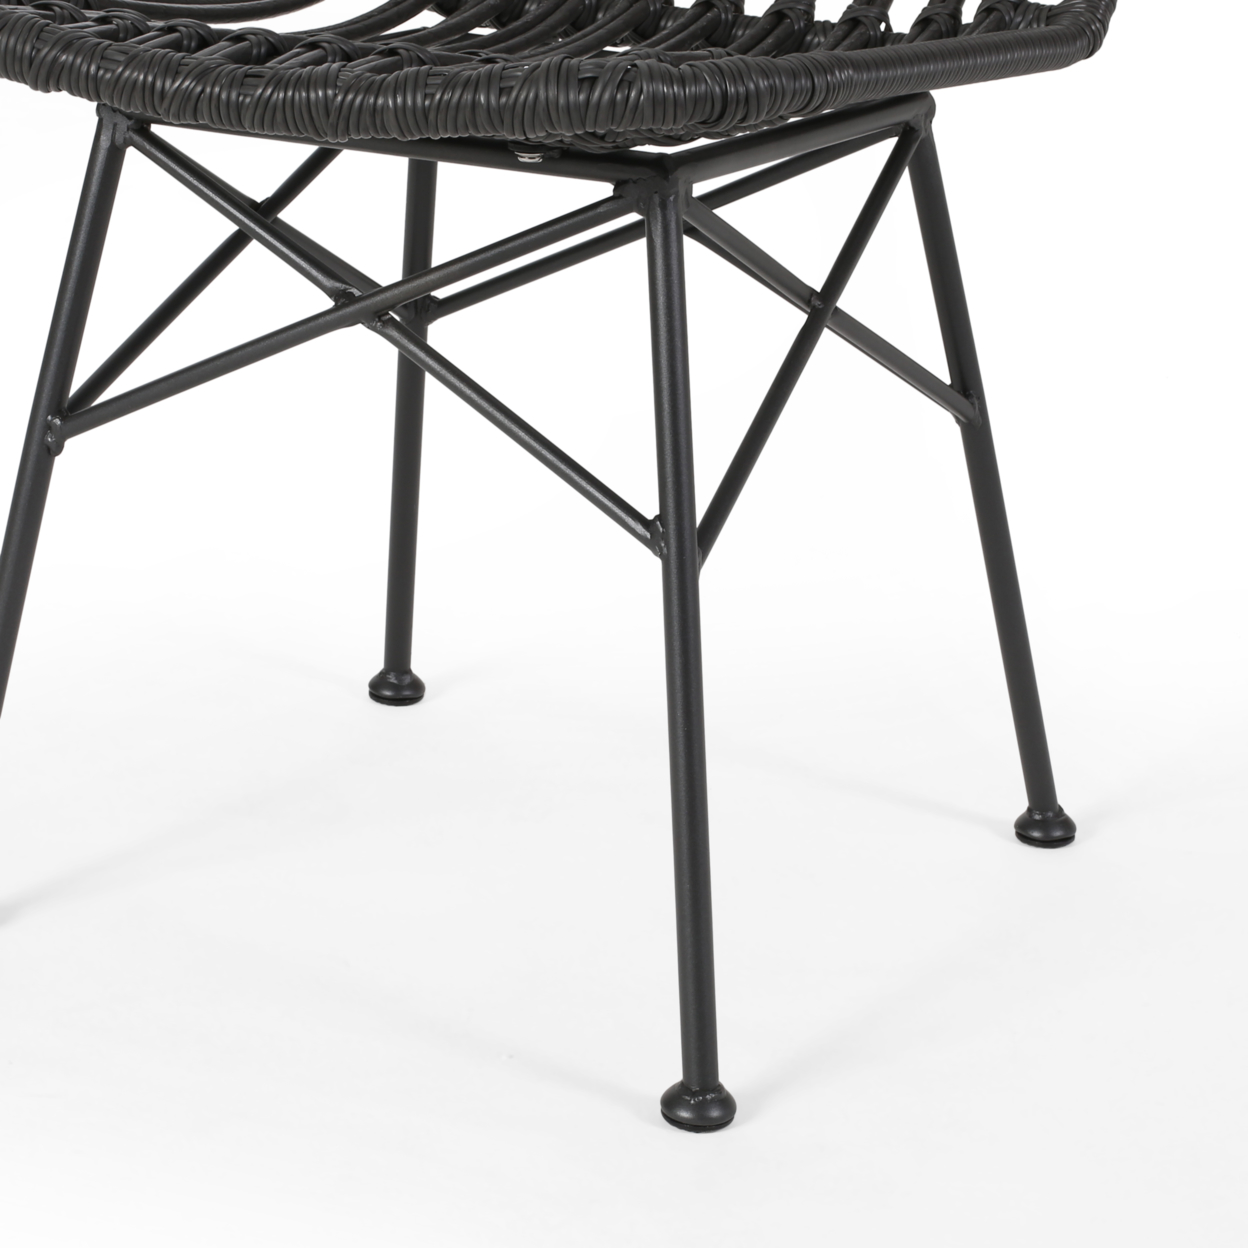 Yilia Outdoor Wicker Dining Chairs (Set Of 2) - Gray, Black